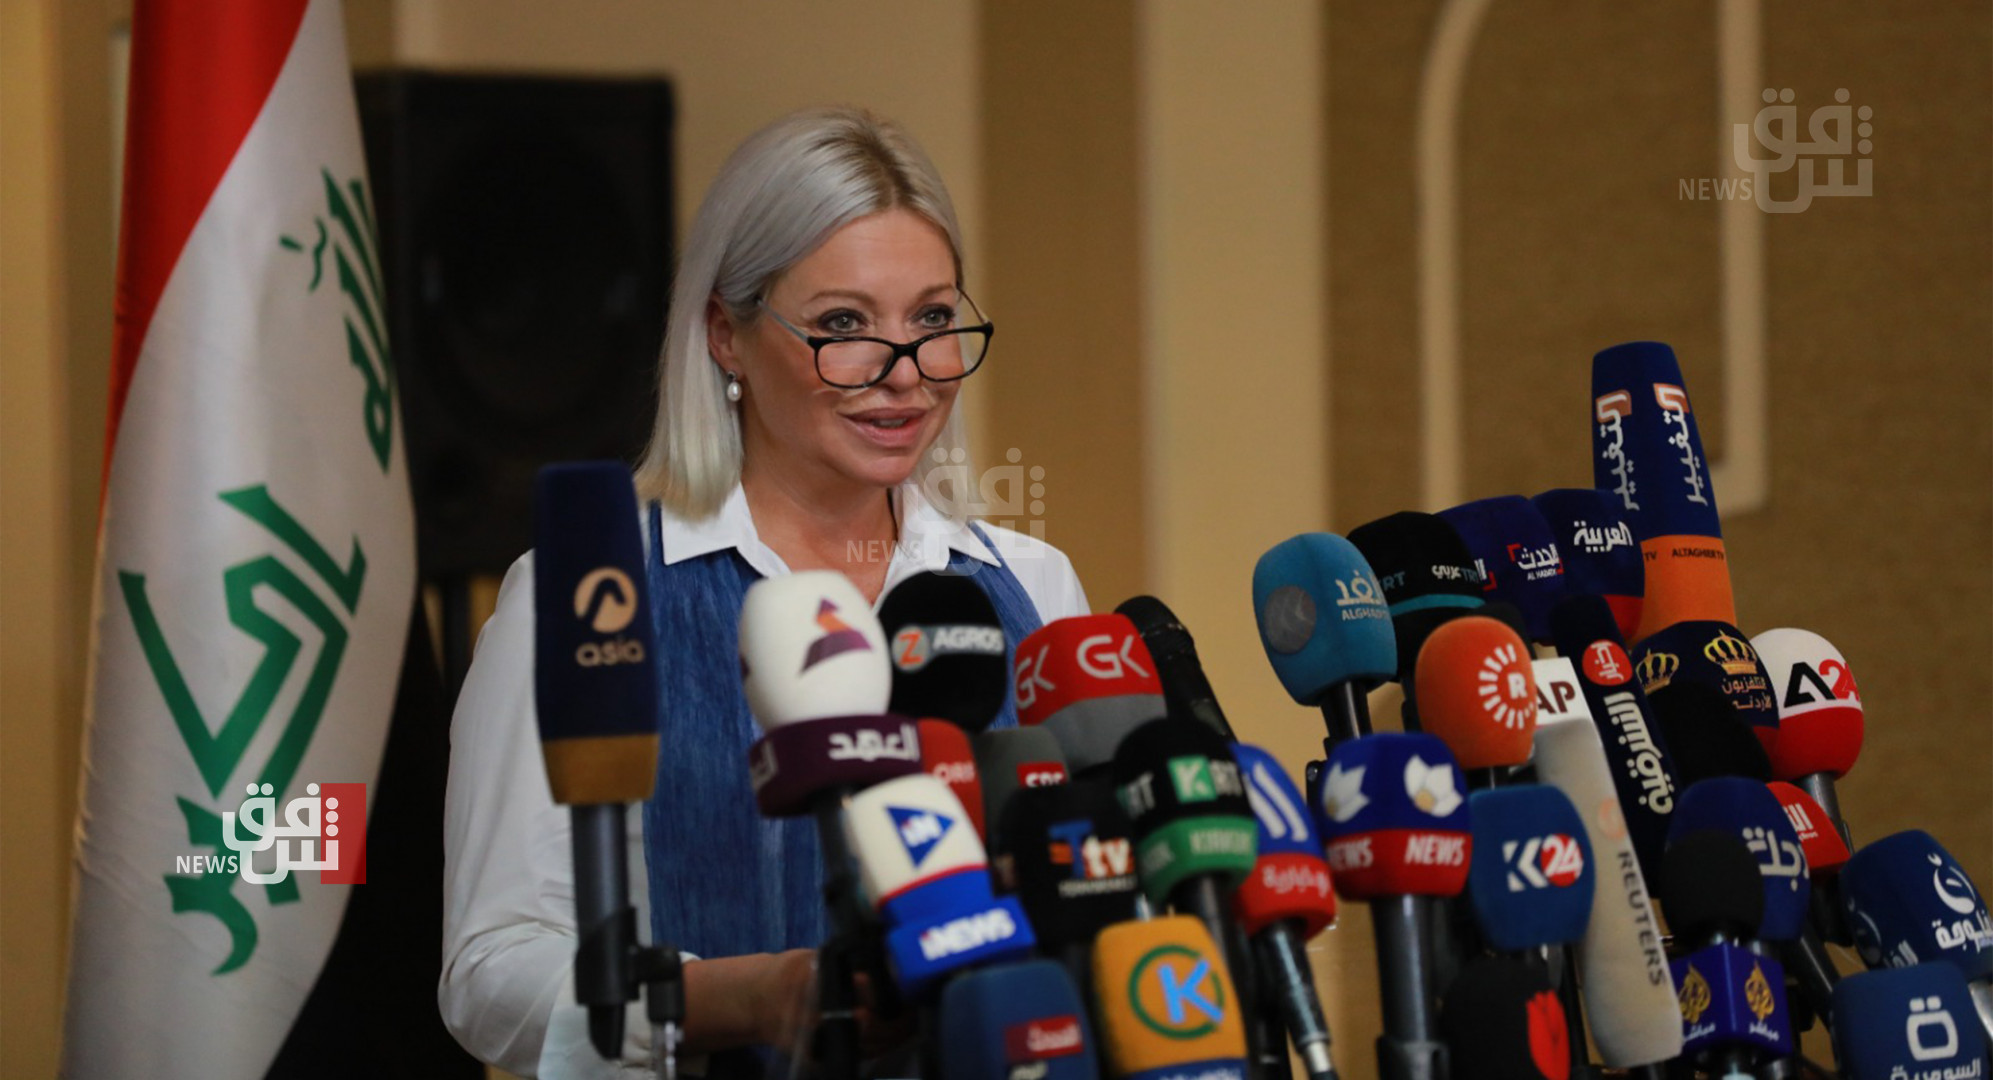 Plasschaert points out the importance of the presidency of the region and pushes Baghdad and Kurdistan towards the private sector and a long-term agreement